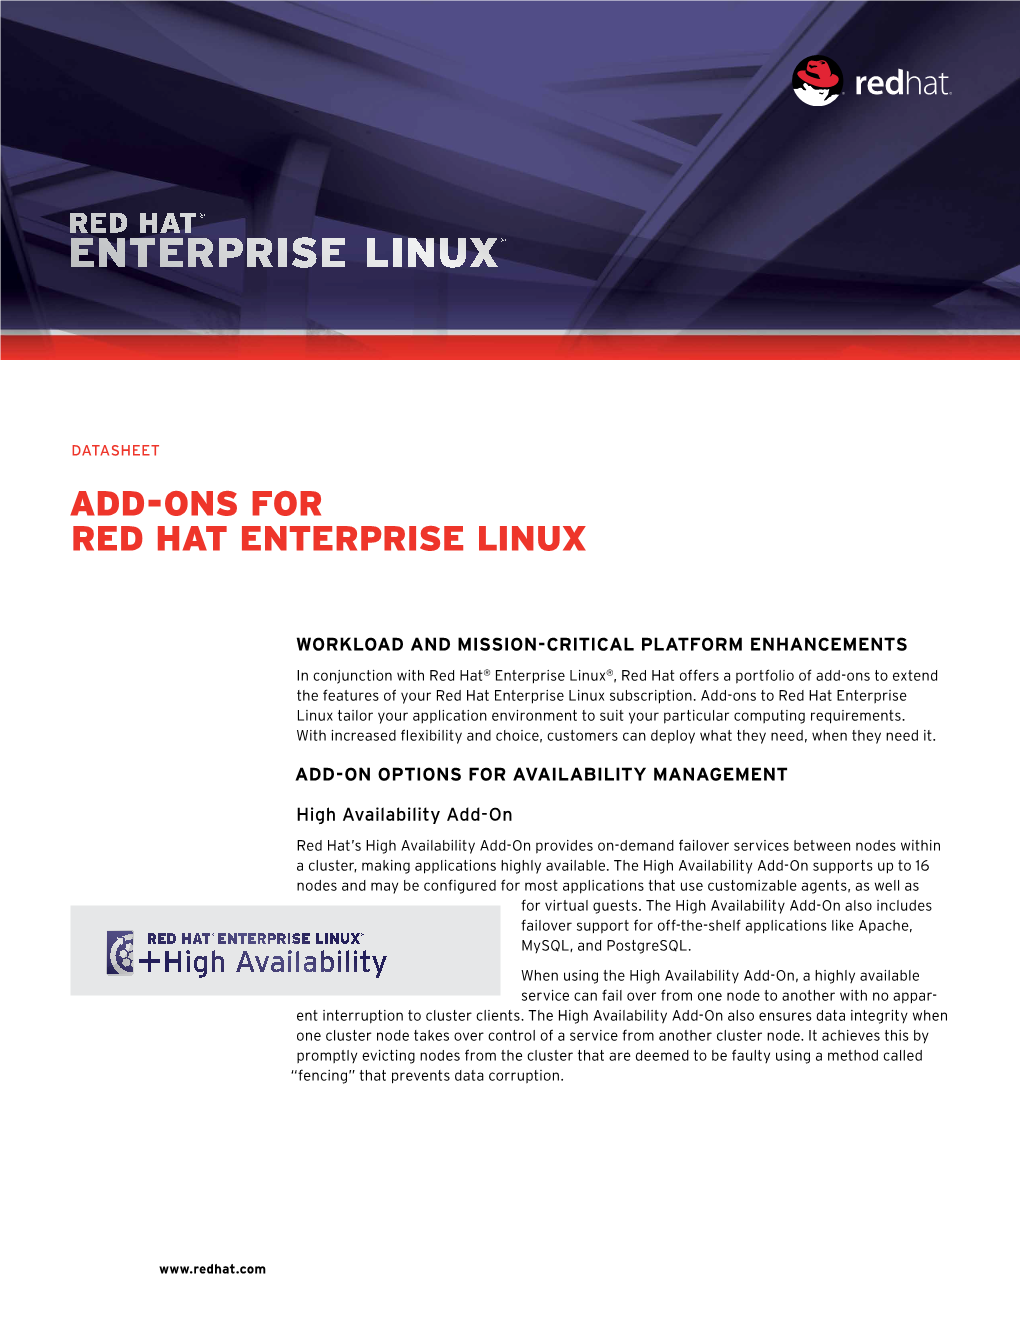 Add-Ons for Red Hat Enterprise Linux